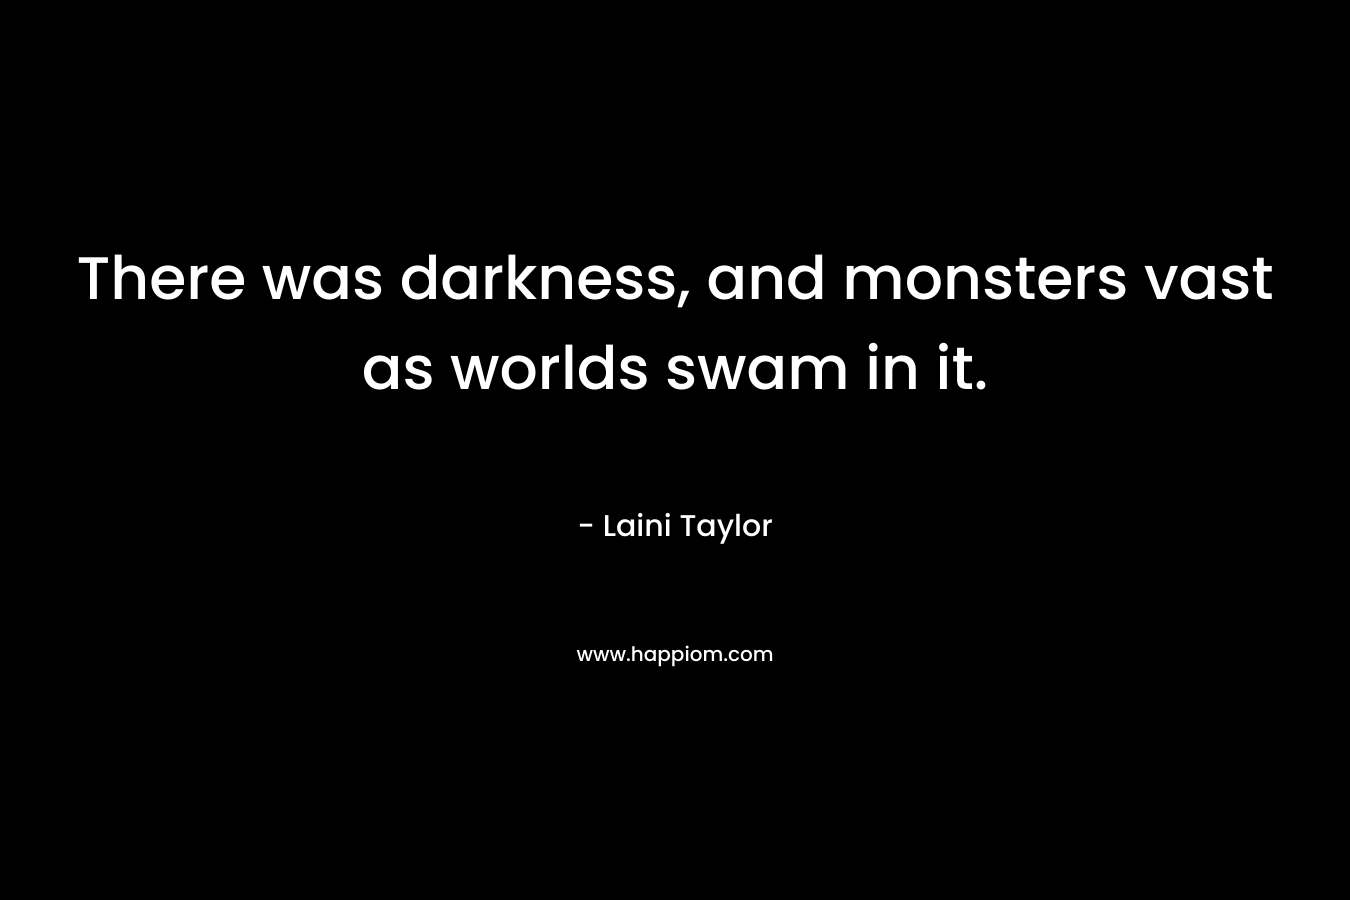 There was darkness, and monsters vast as worlds swam in it.